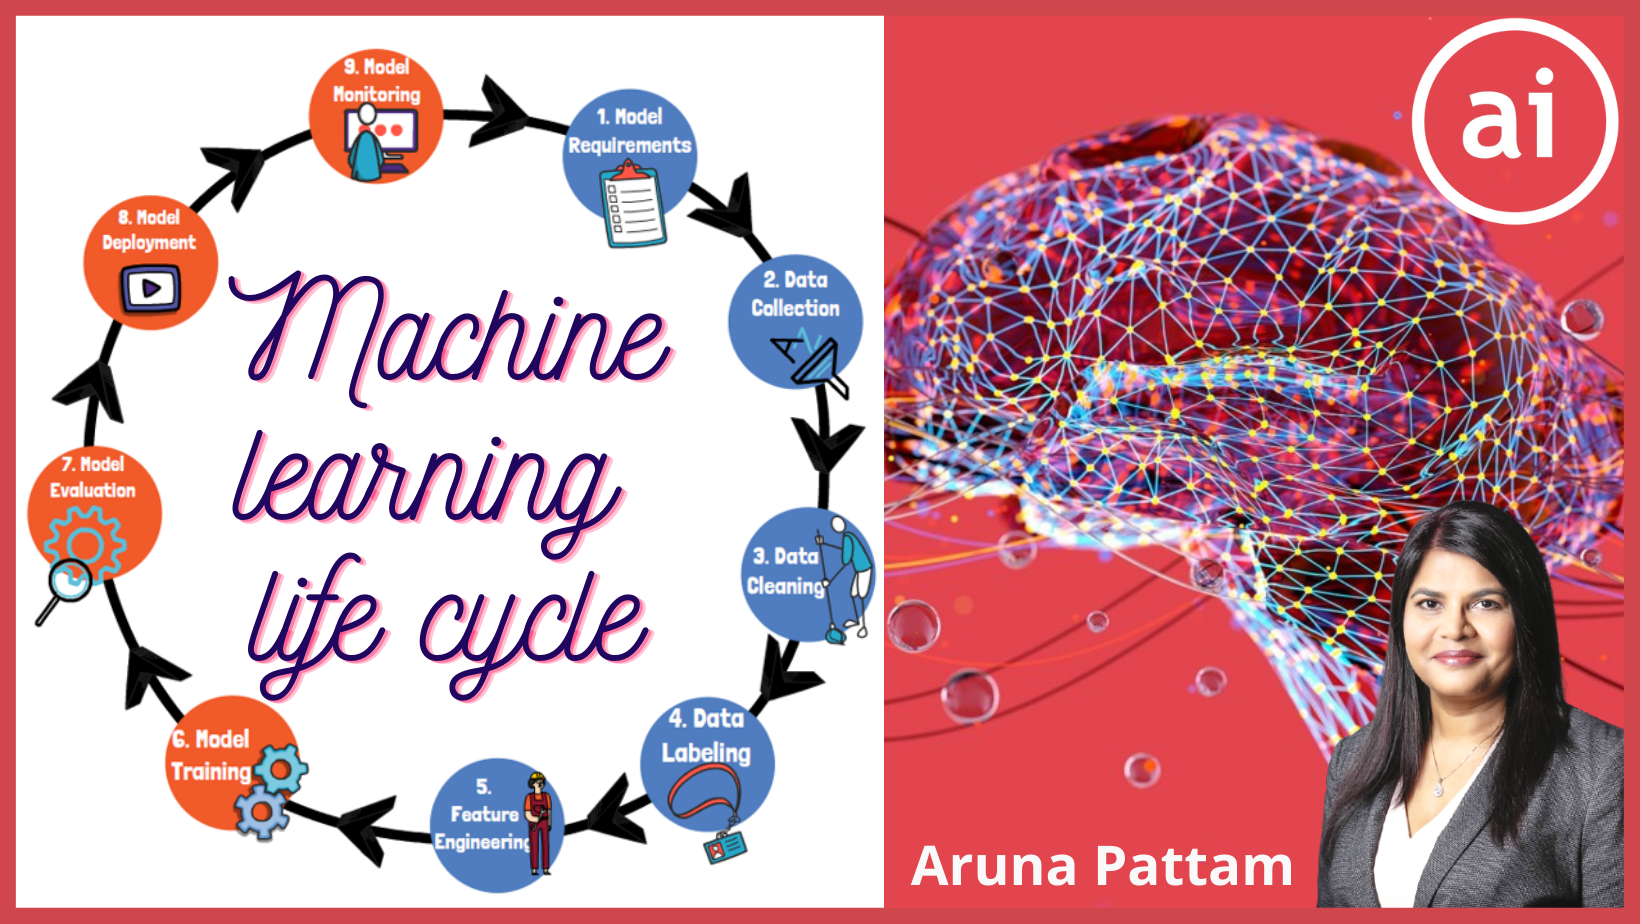 What is Machine Learning Life Cycle?